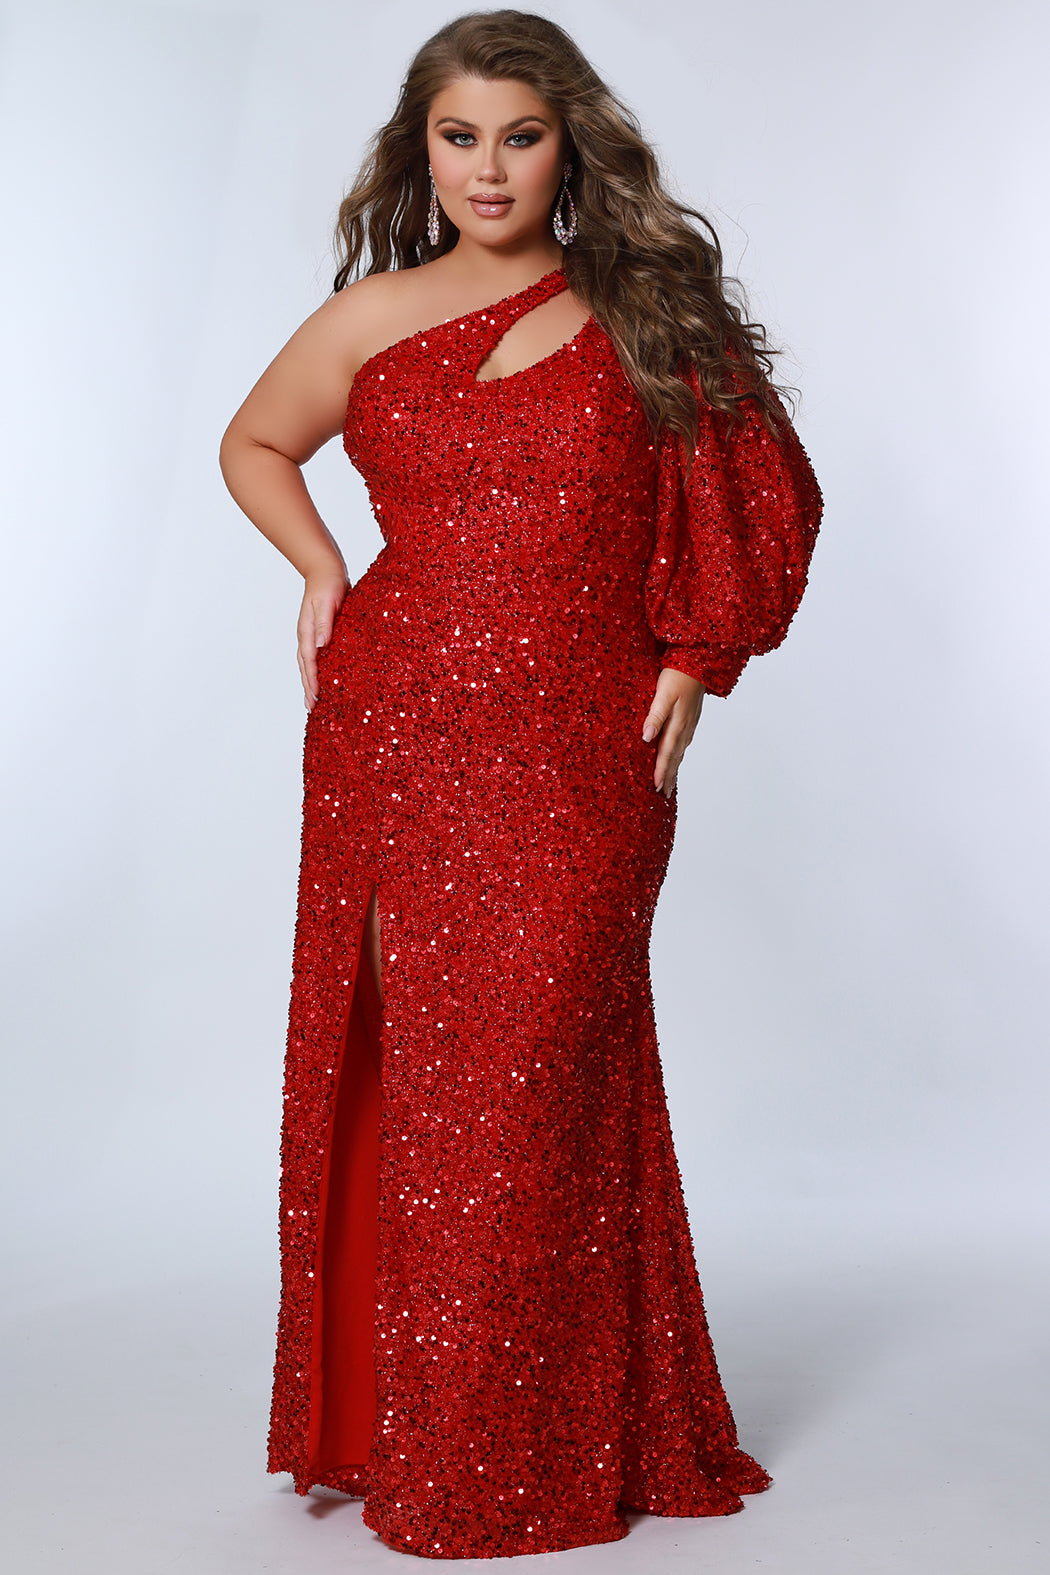 Extended Plus Size Women's Formal & Occasions Dresses (34-40